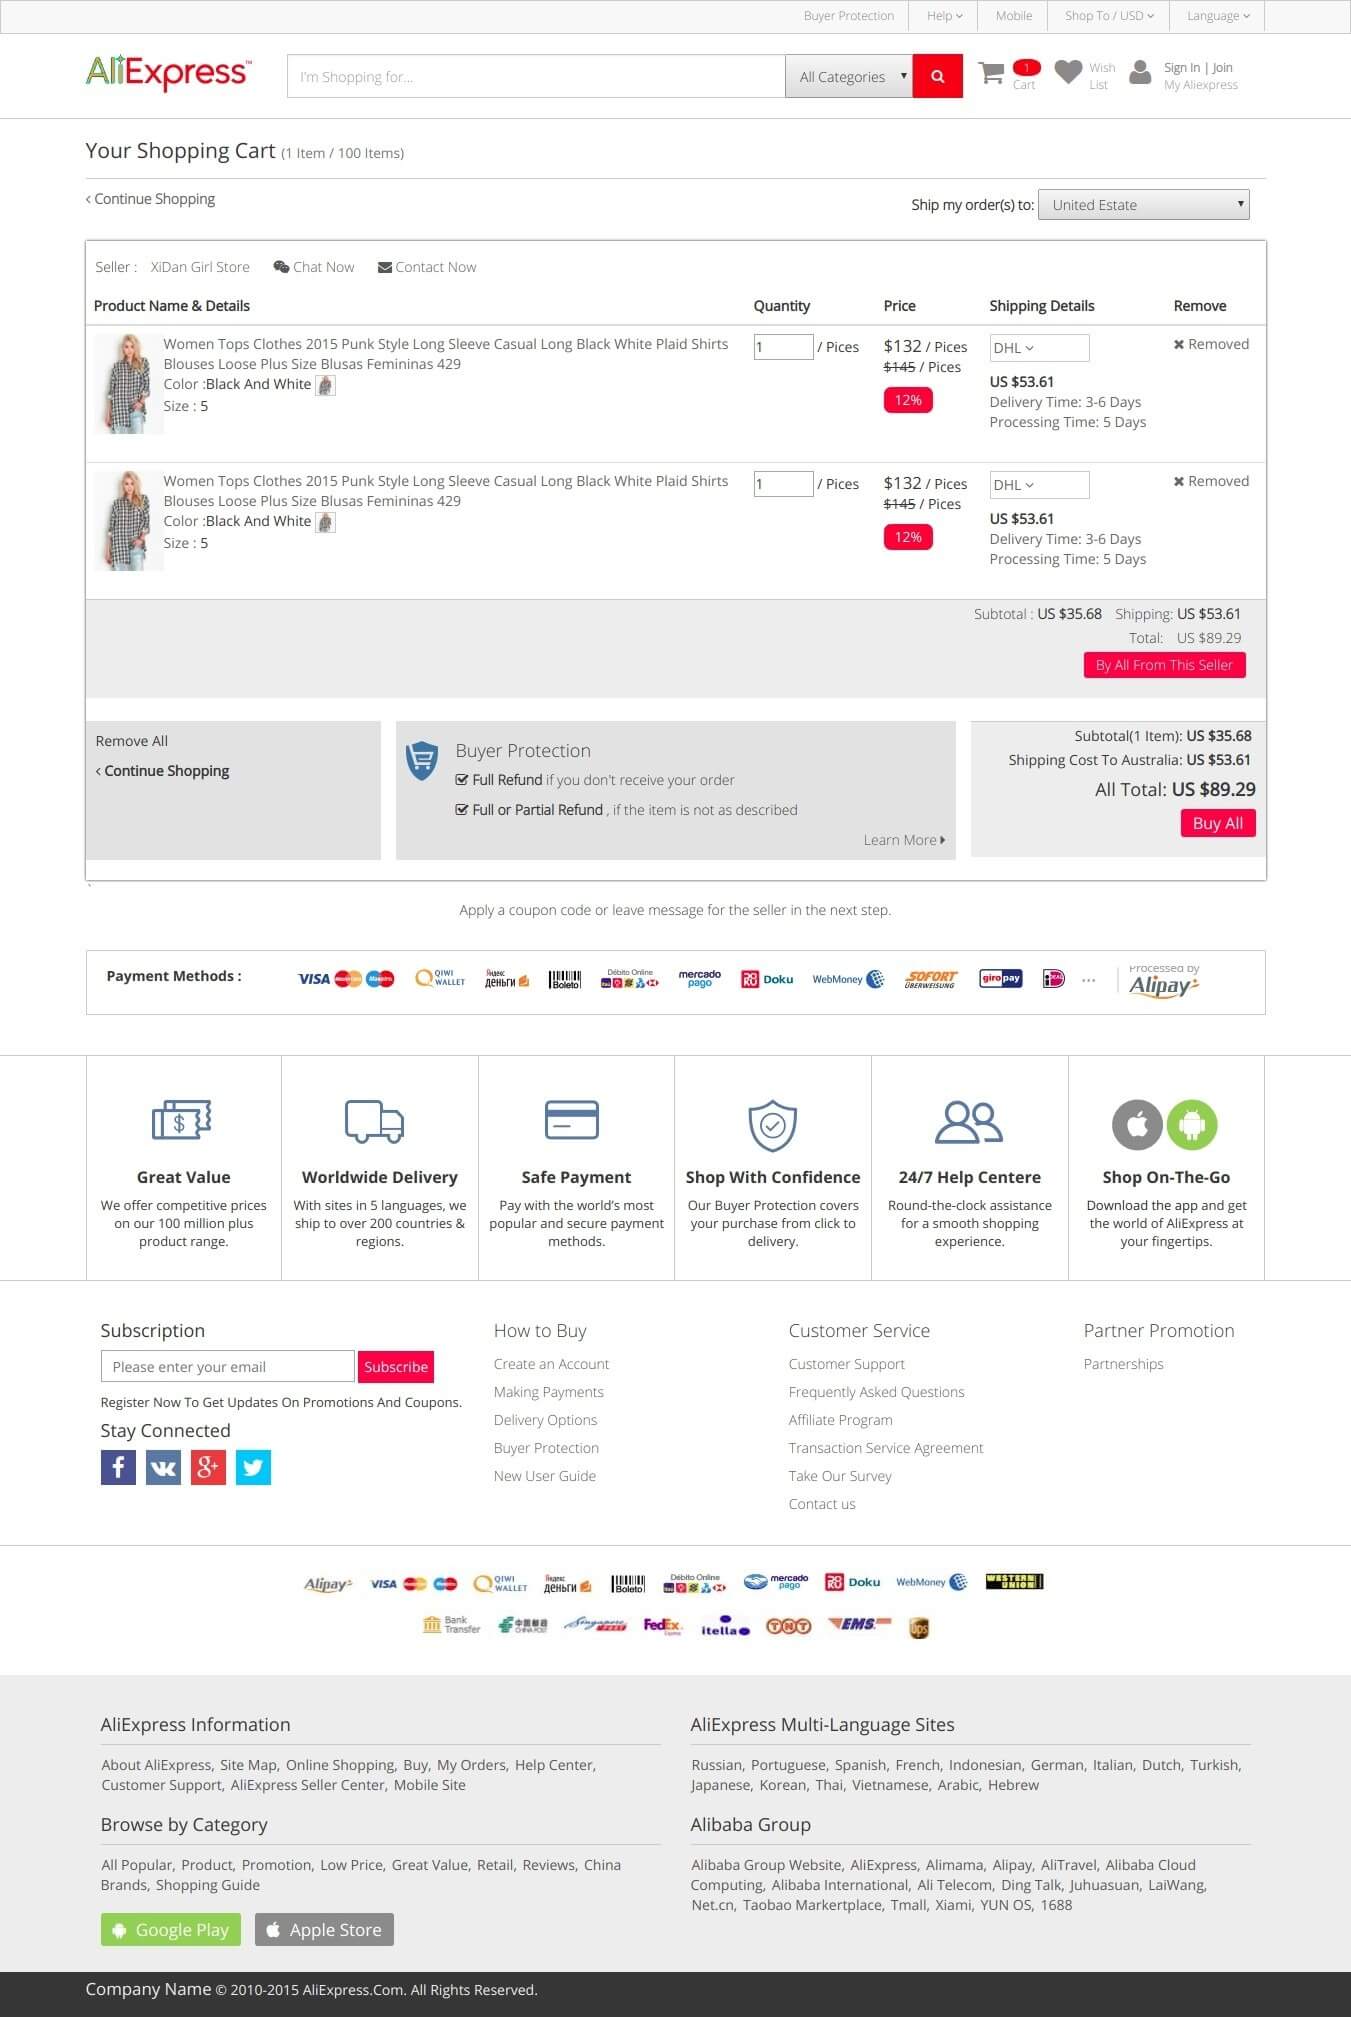 Cart page Design - View image in New Tab for large experience